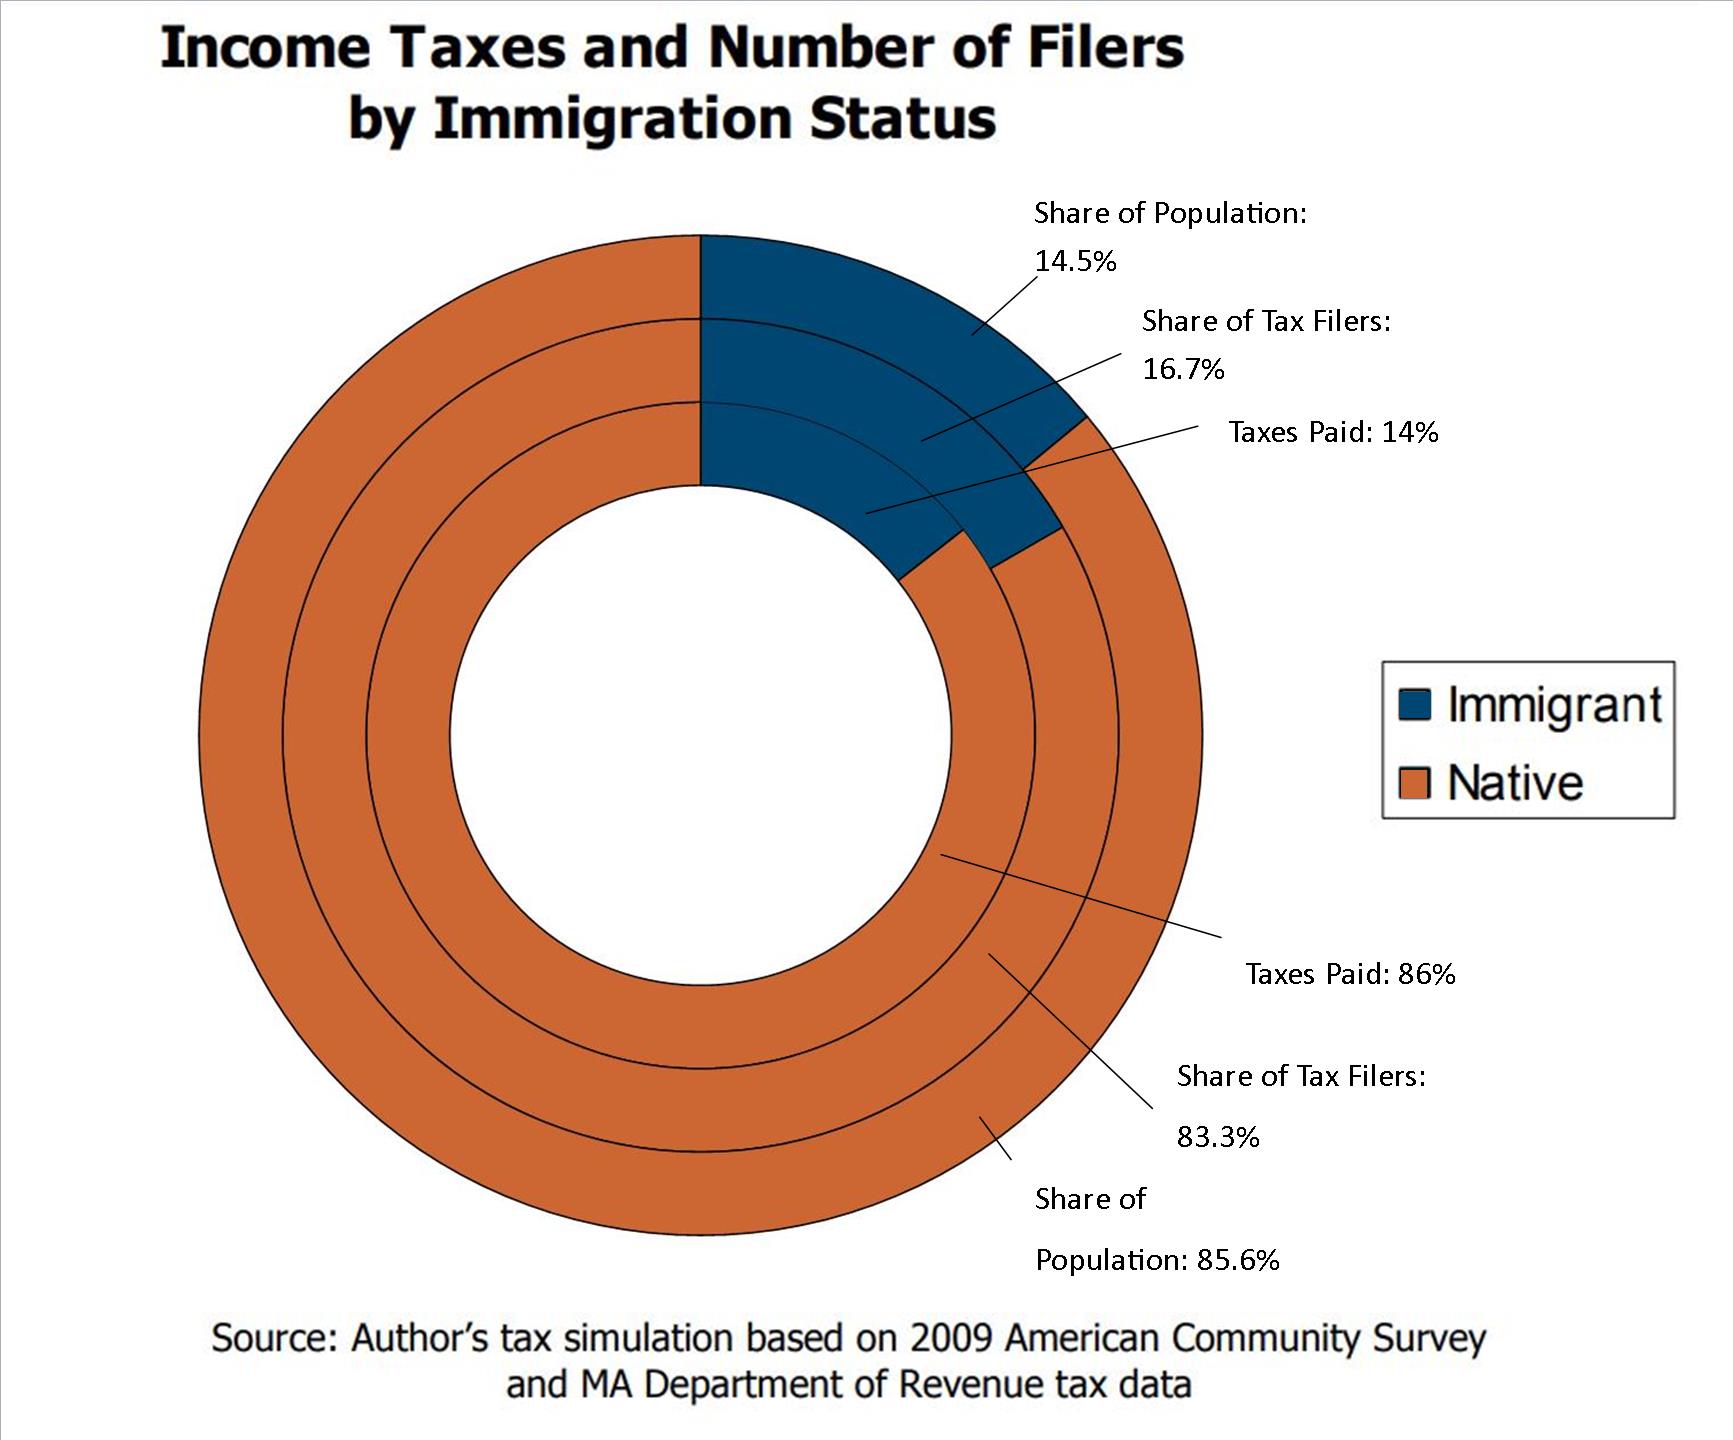 Income Taxes and Number of Filers by Immigration Status chart